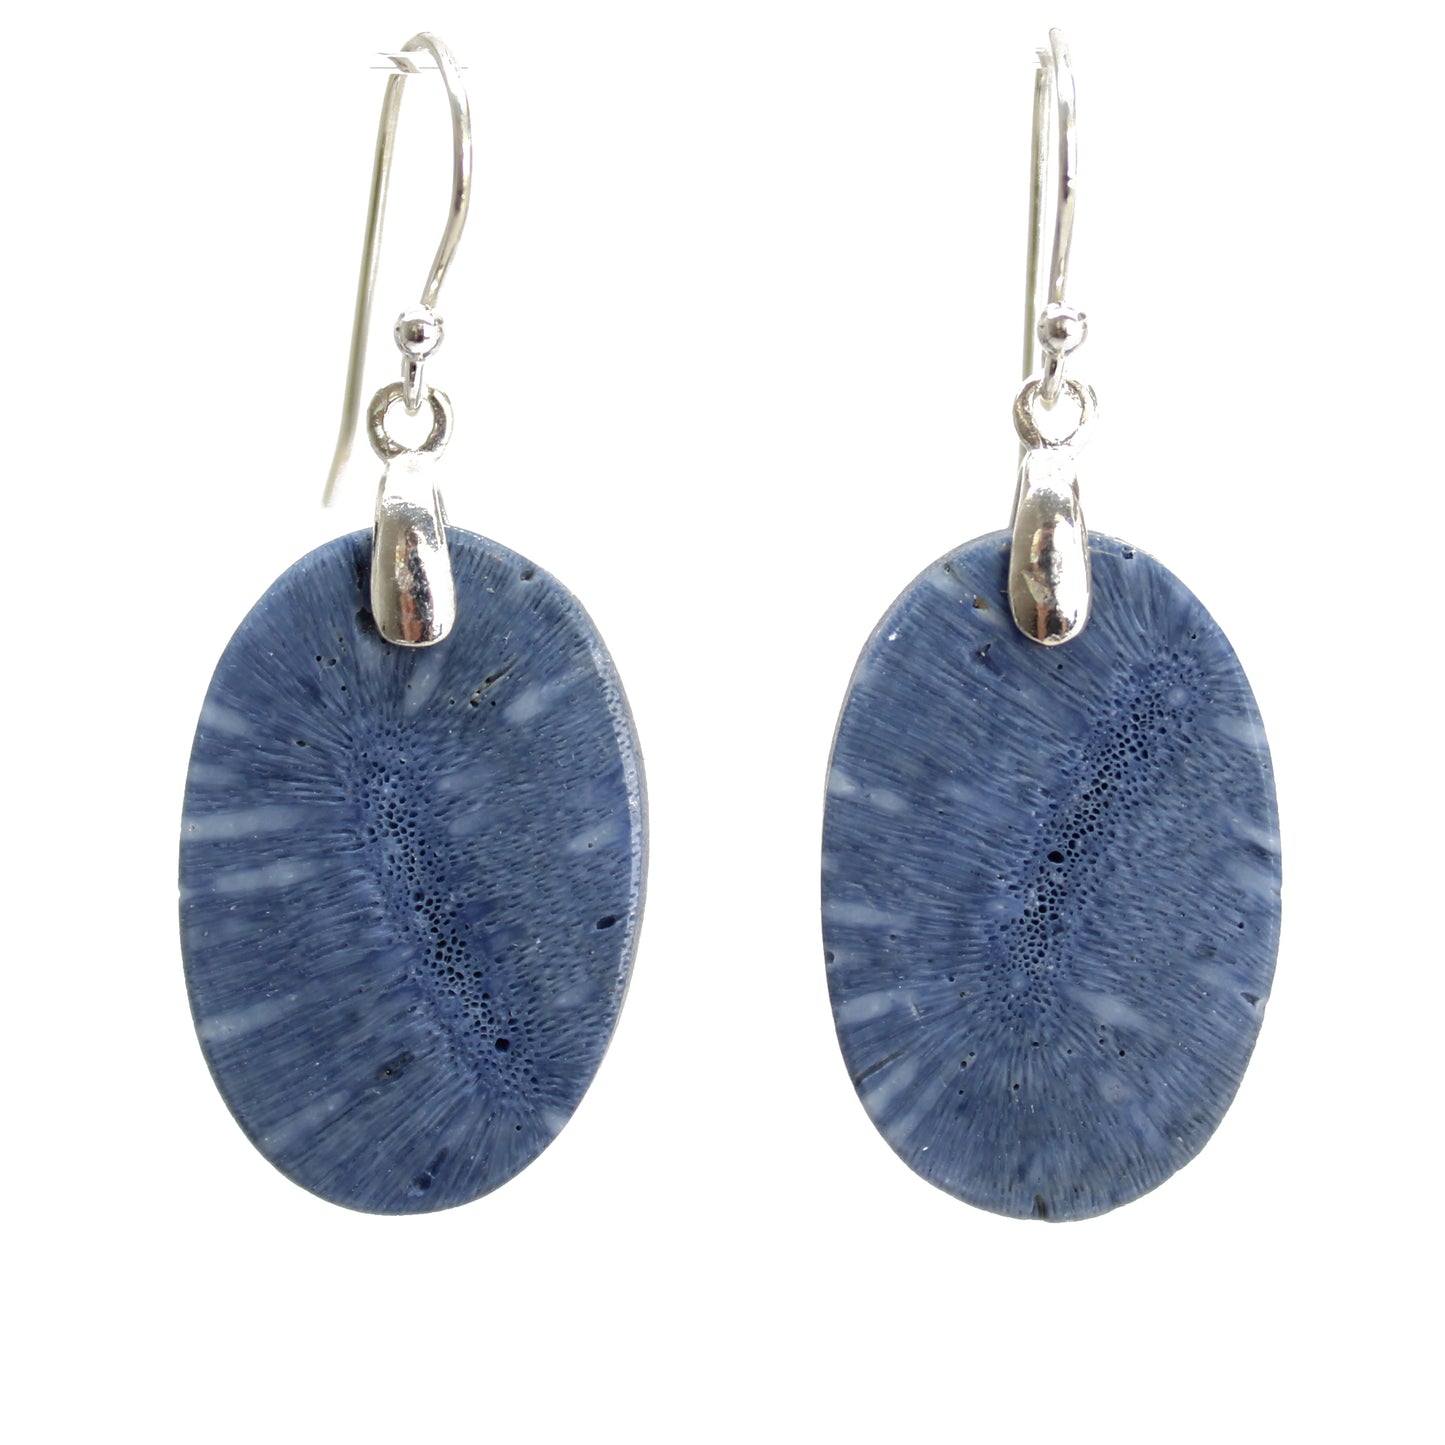 Blue Sponge Coral Earrings with Sterling Silver Ear Wires